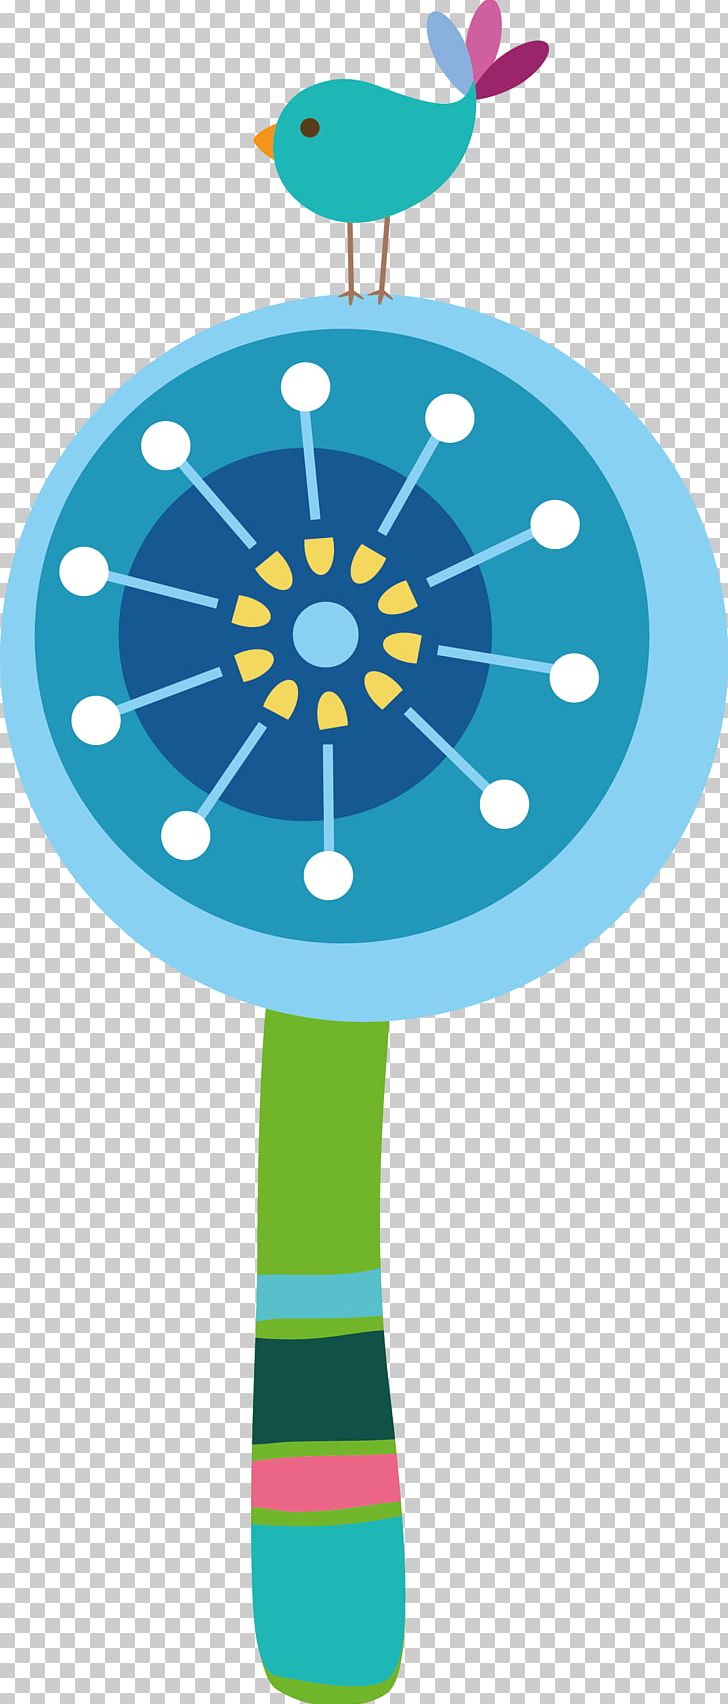 Baby Rattle Illustration PNG, Clipart, Area, Baby Rattle, Candy Lollipop, Cartoon, Cartoon Lollipop Free PNG Download